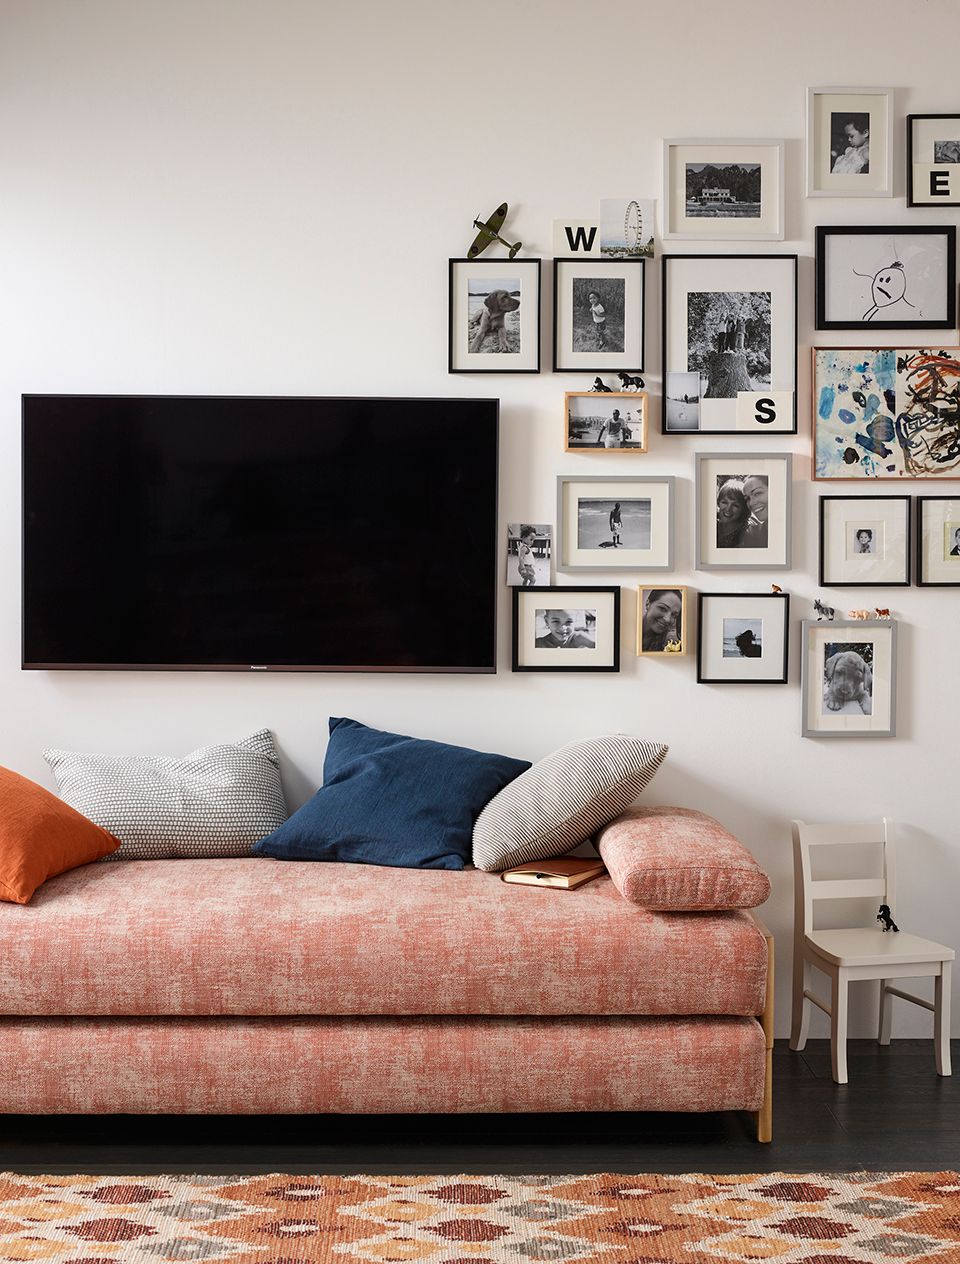 Picture gallery wall with TV